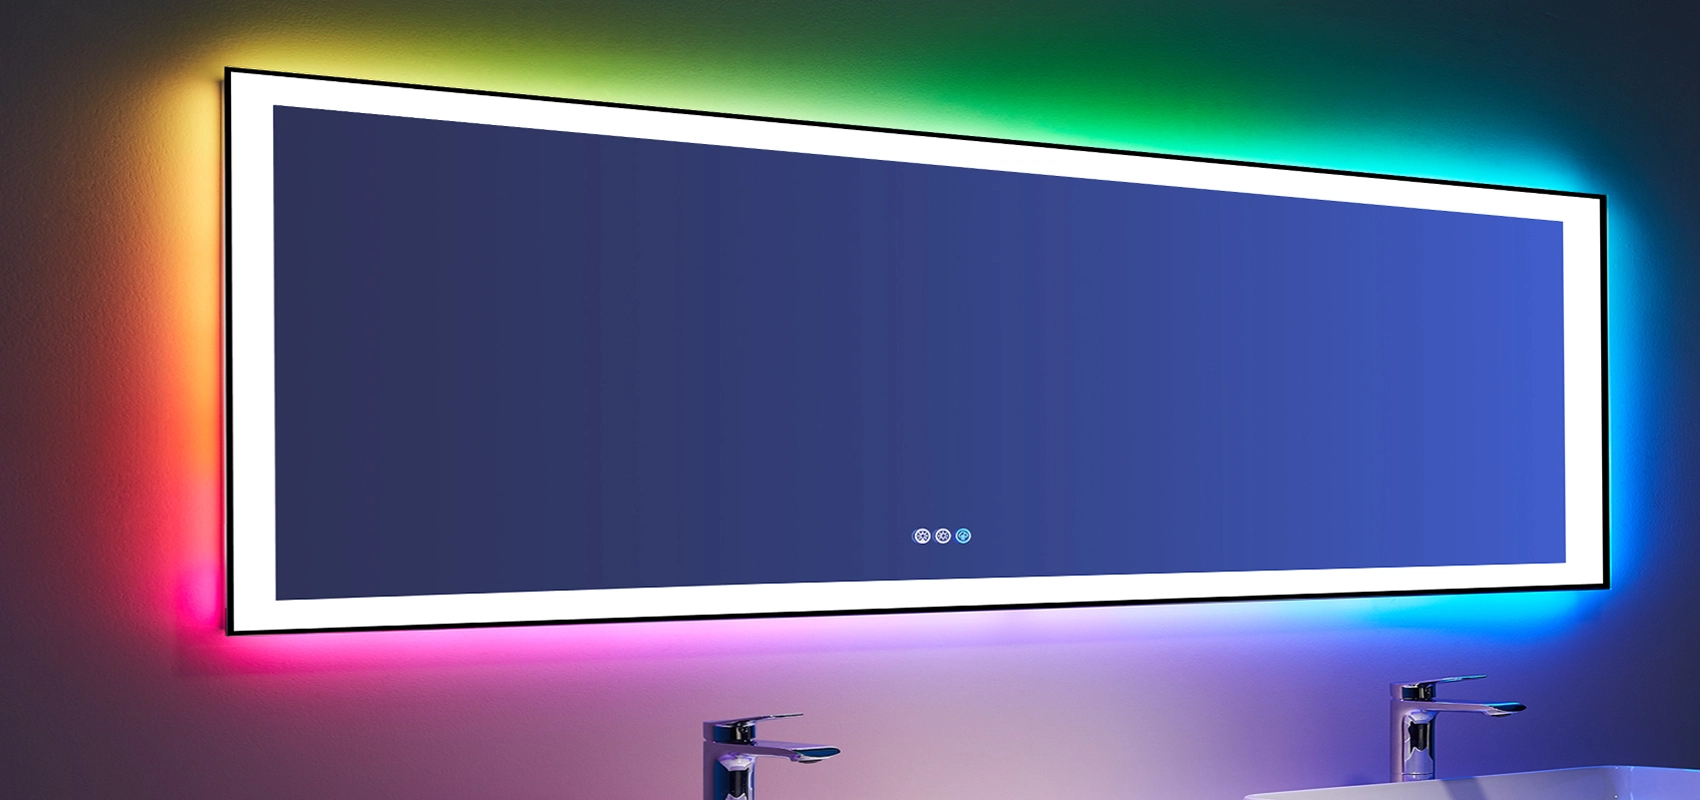 What are the advantages of RGB bathroom mirrors?